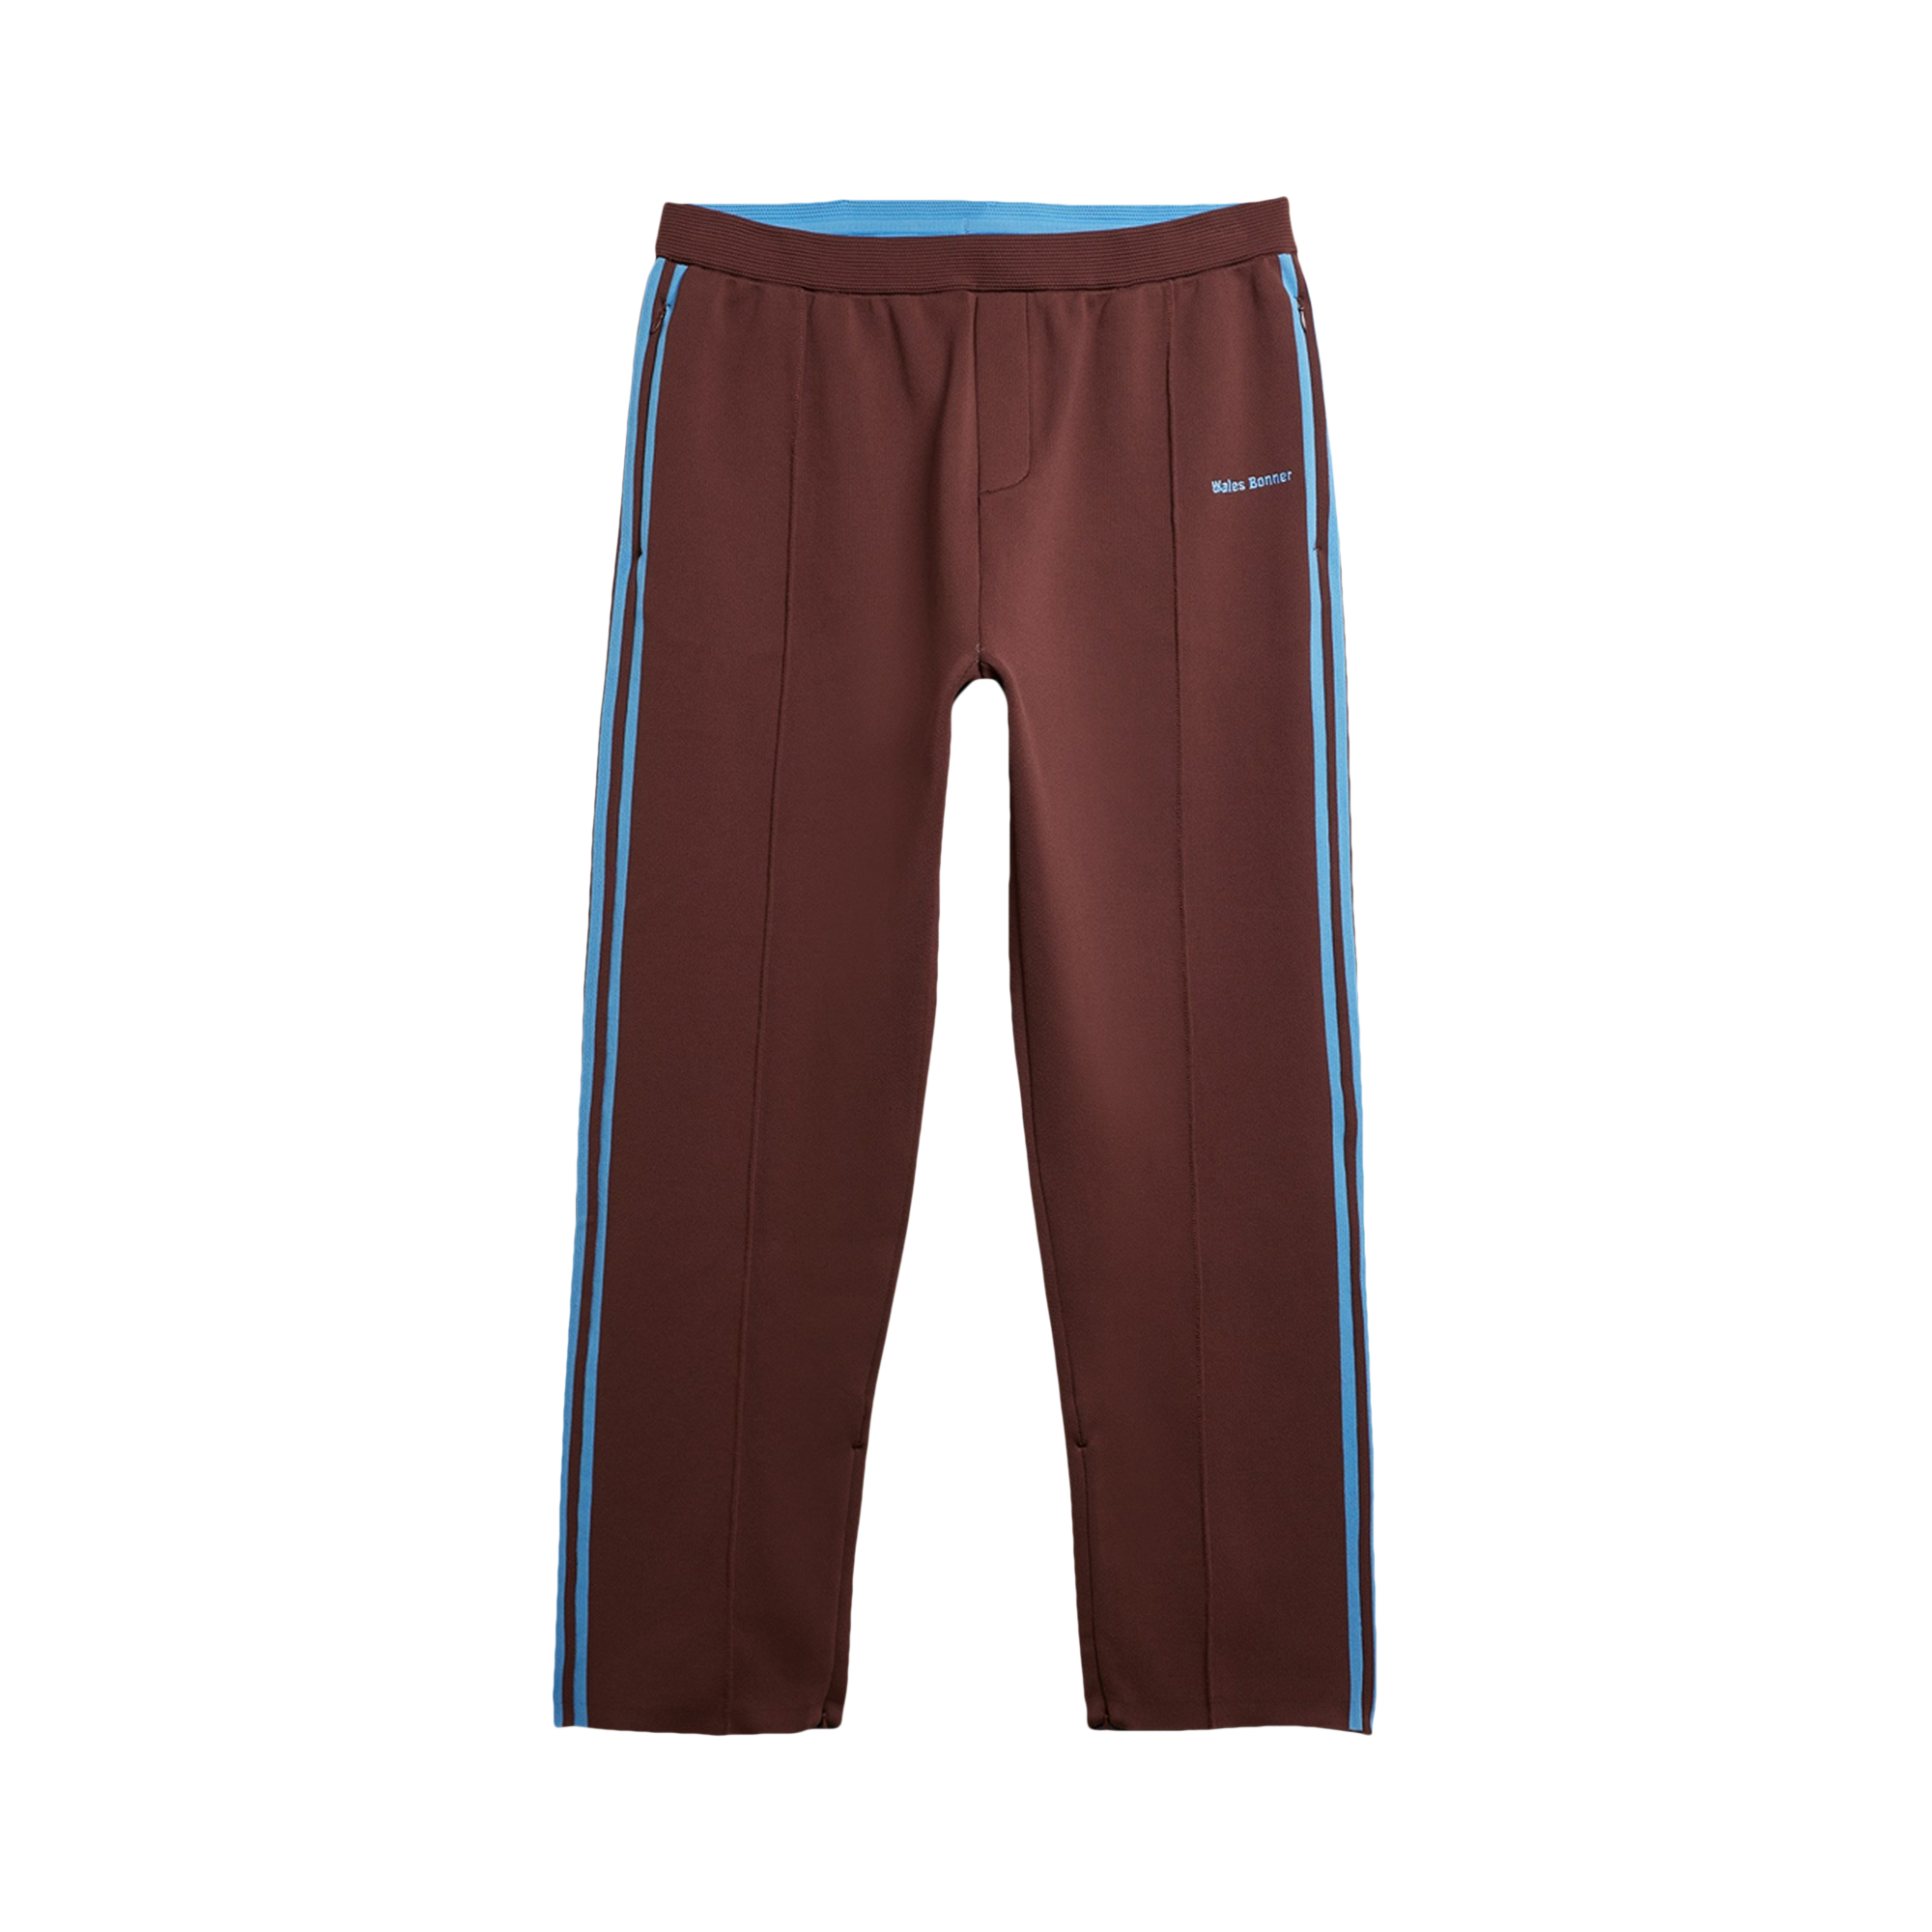 Pre-owned Adidas Originals Adidas X Wales Bonner Knit Track Pants 'mystery Brown'